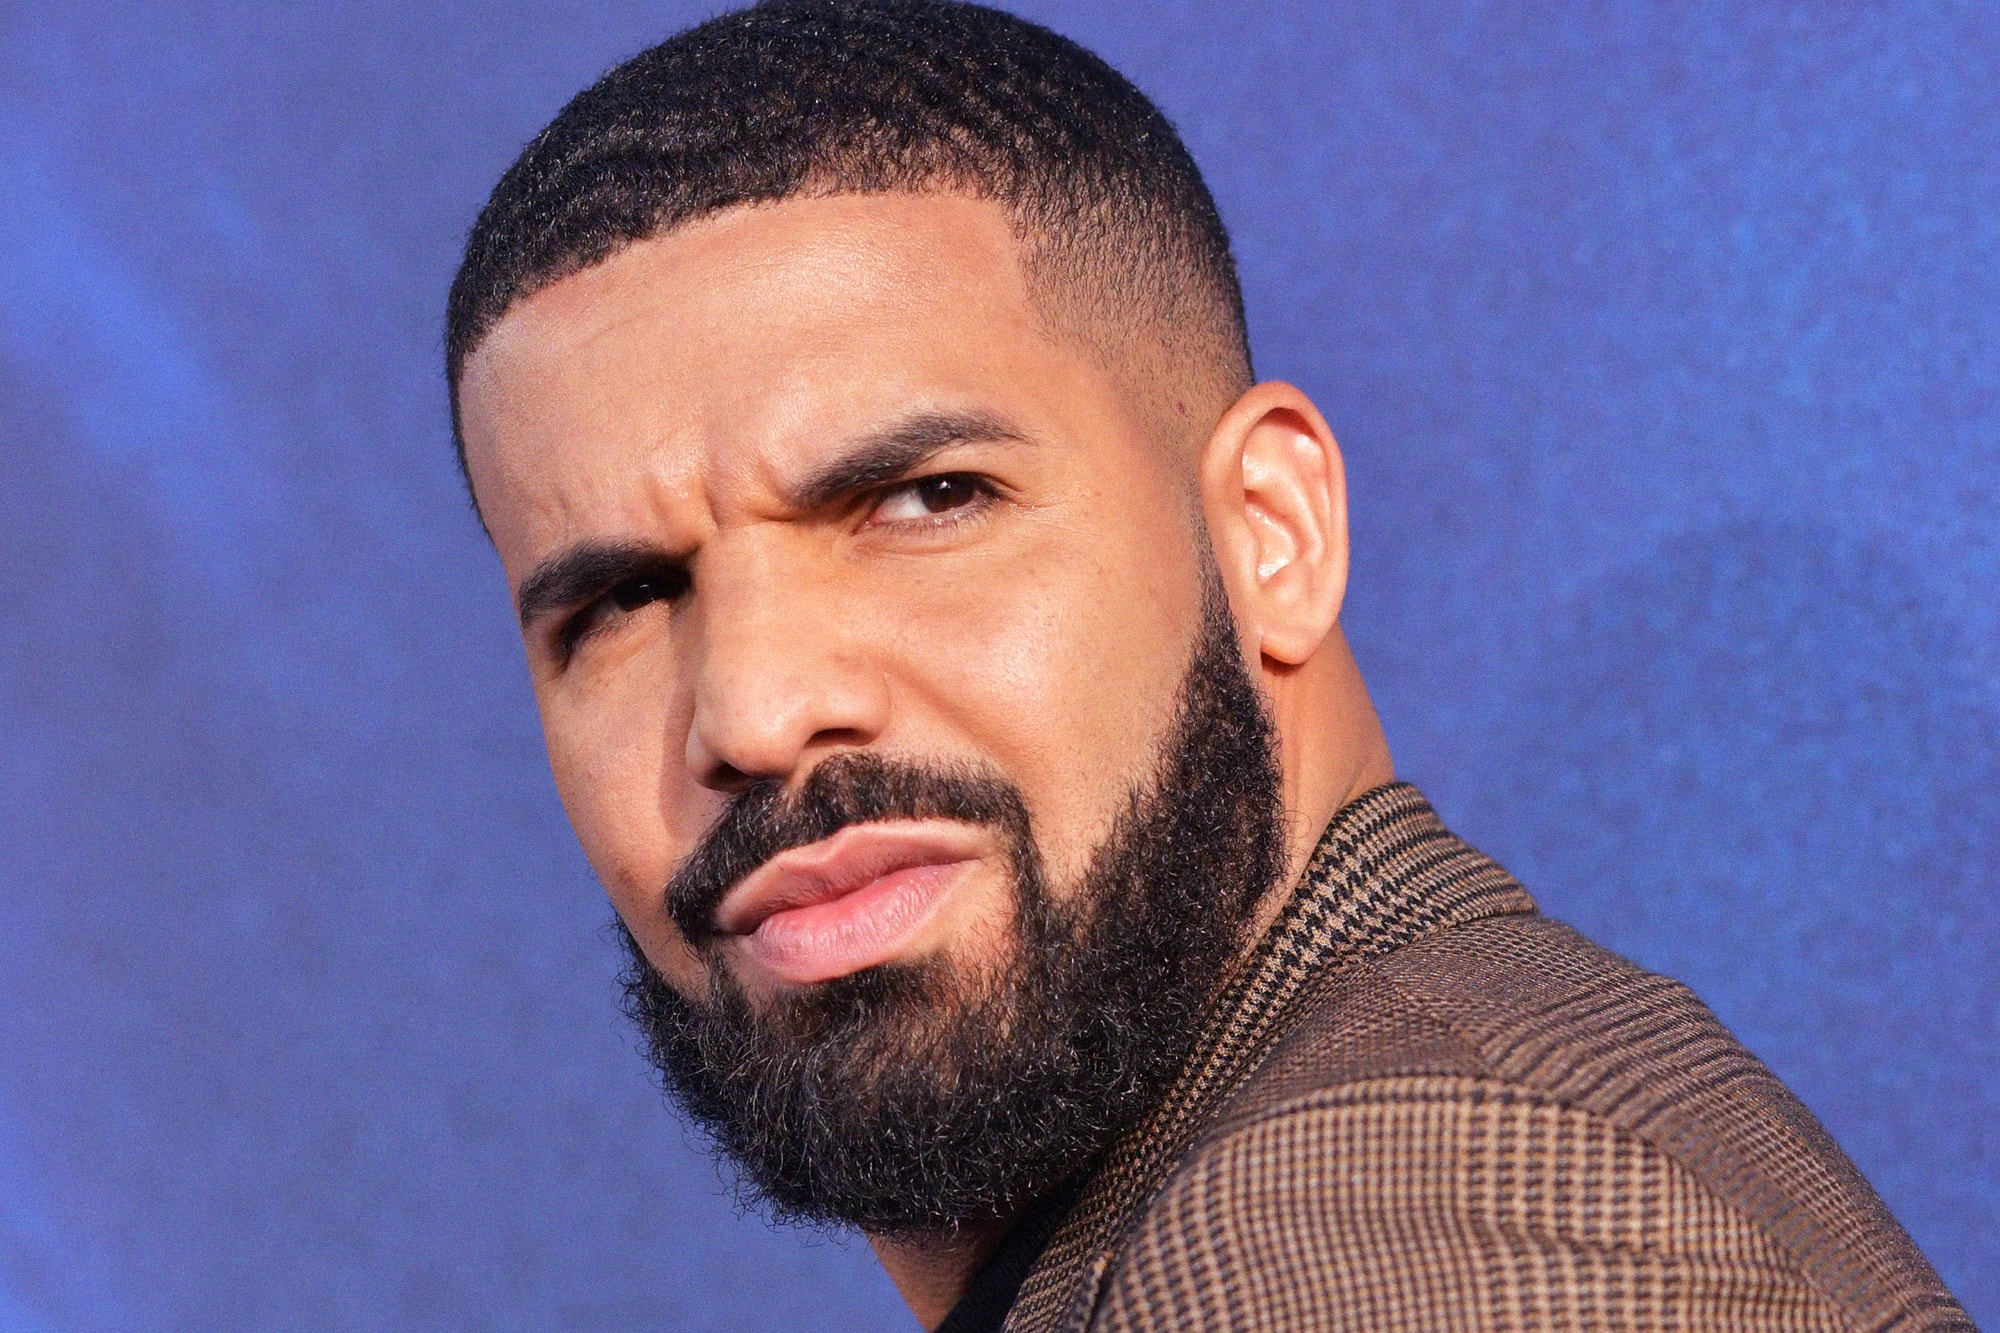 Drake Has the Most Billboard Hot 100 Entries Ever Lil Yachty DaBaby OVO Drizzy Champagne Papi Toronto Ontario Canada Best I Ever Had The Six God HYPEBEAST Music Stream Listen Freestyle